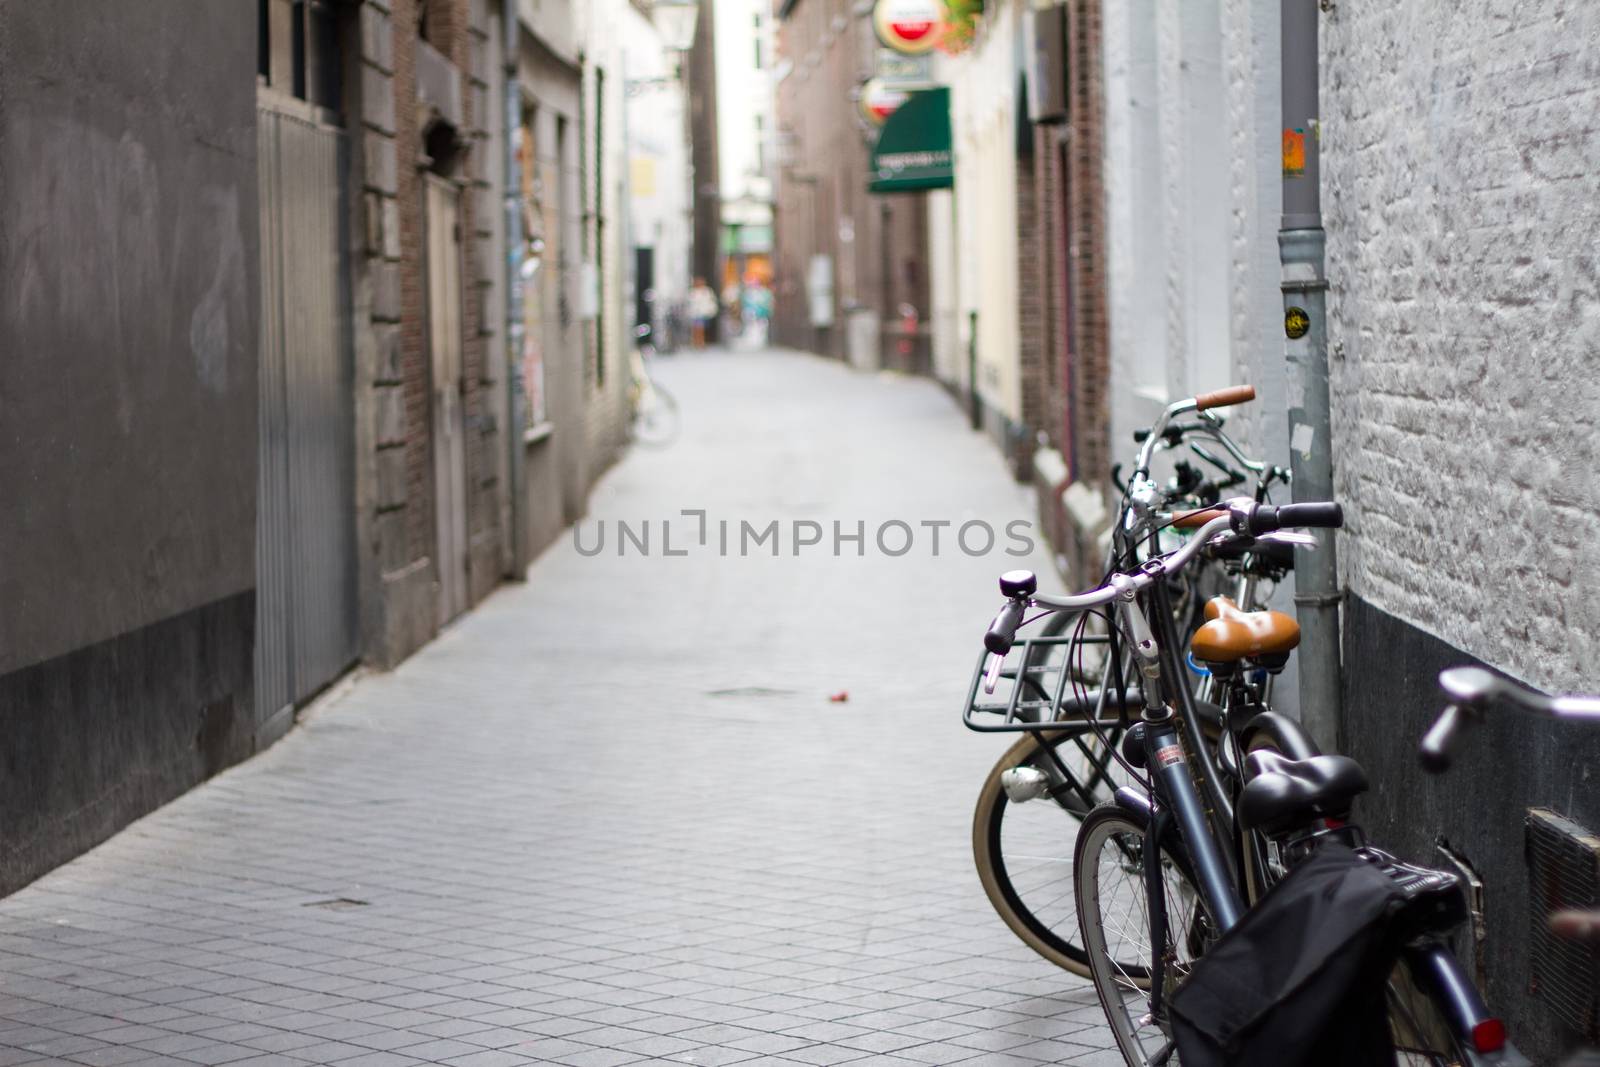 European bicycles in a city parked up by samULvisuals